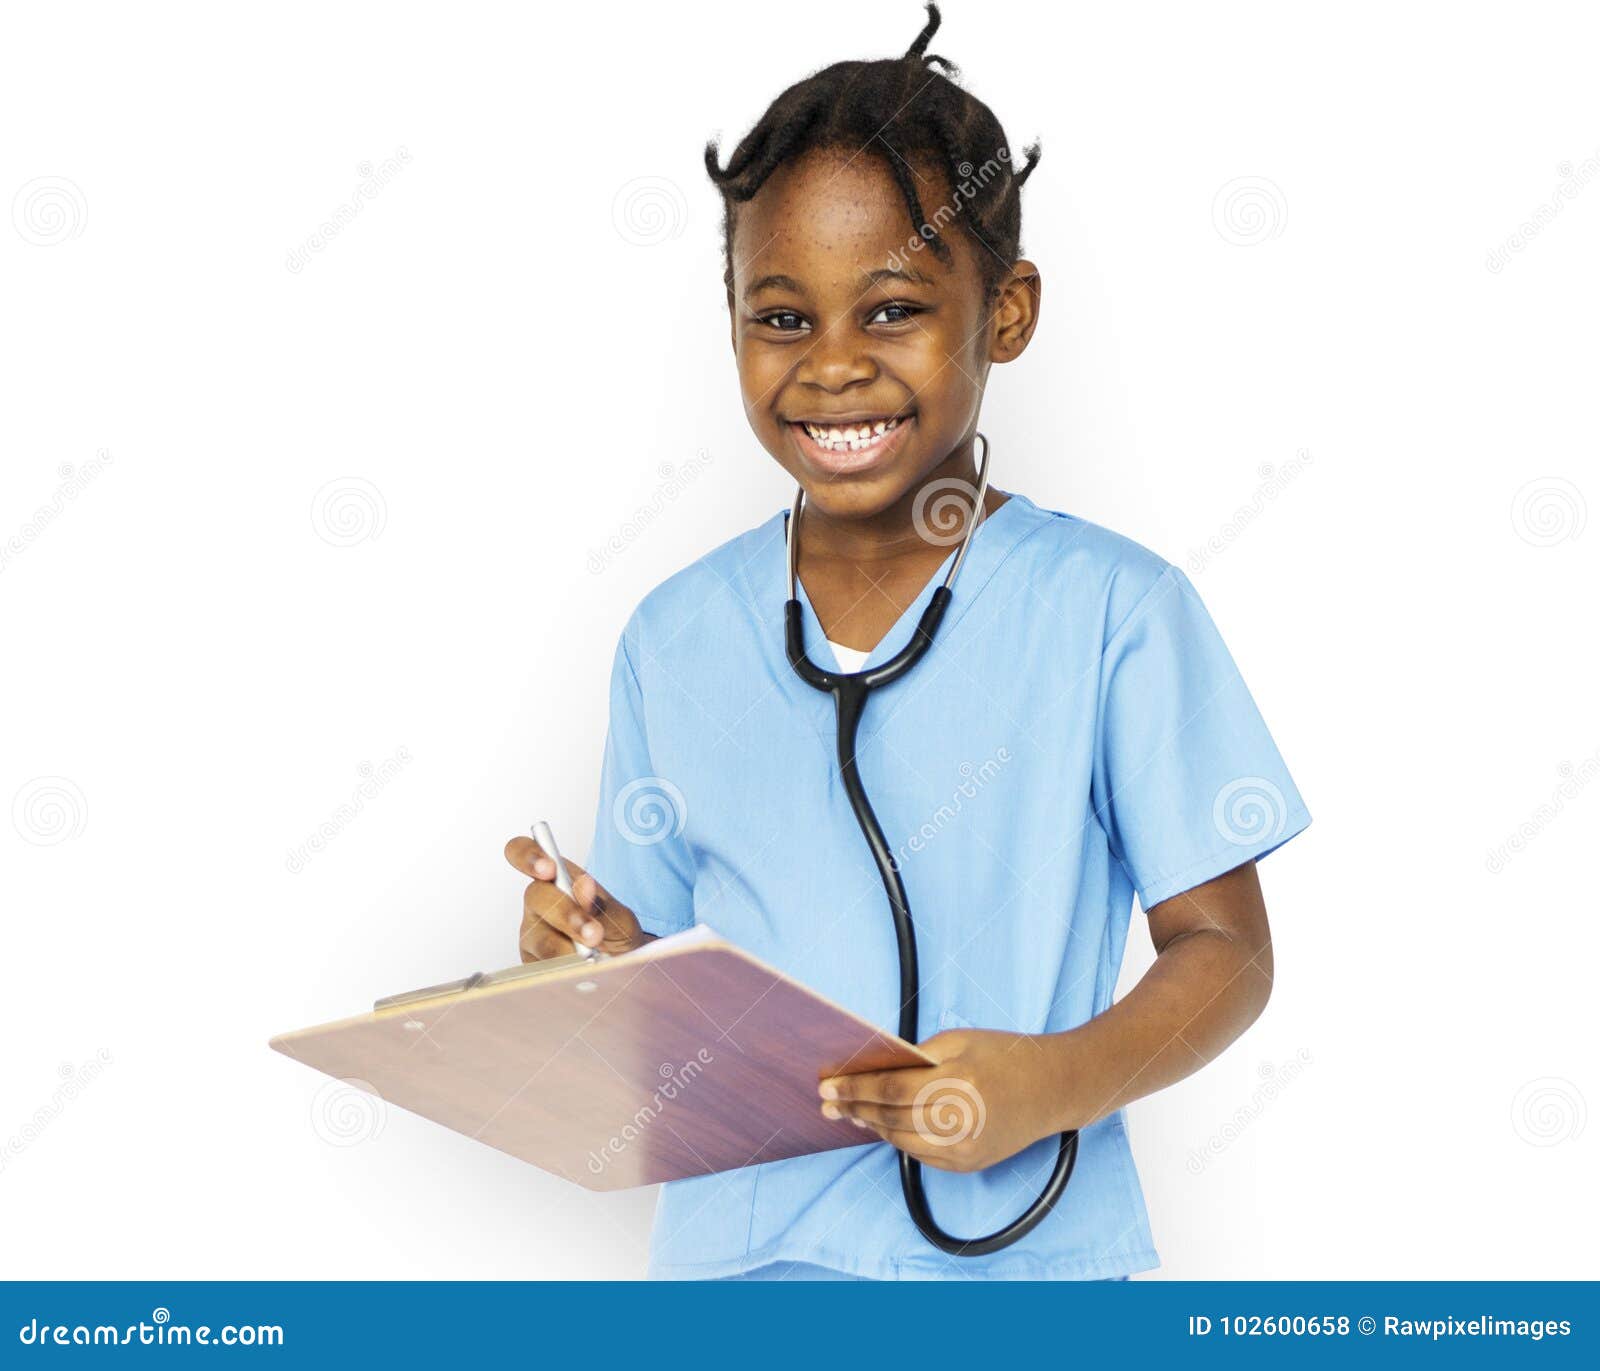 Little Girl with Doctor Dream Job Smiling Stock Photo - Image of